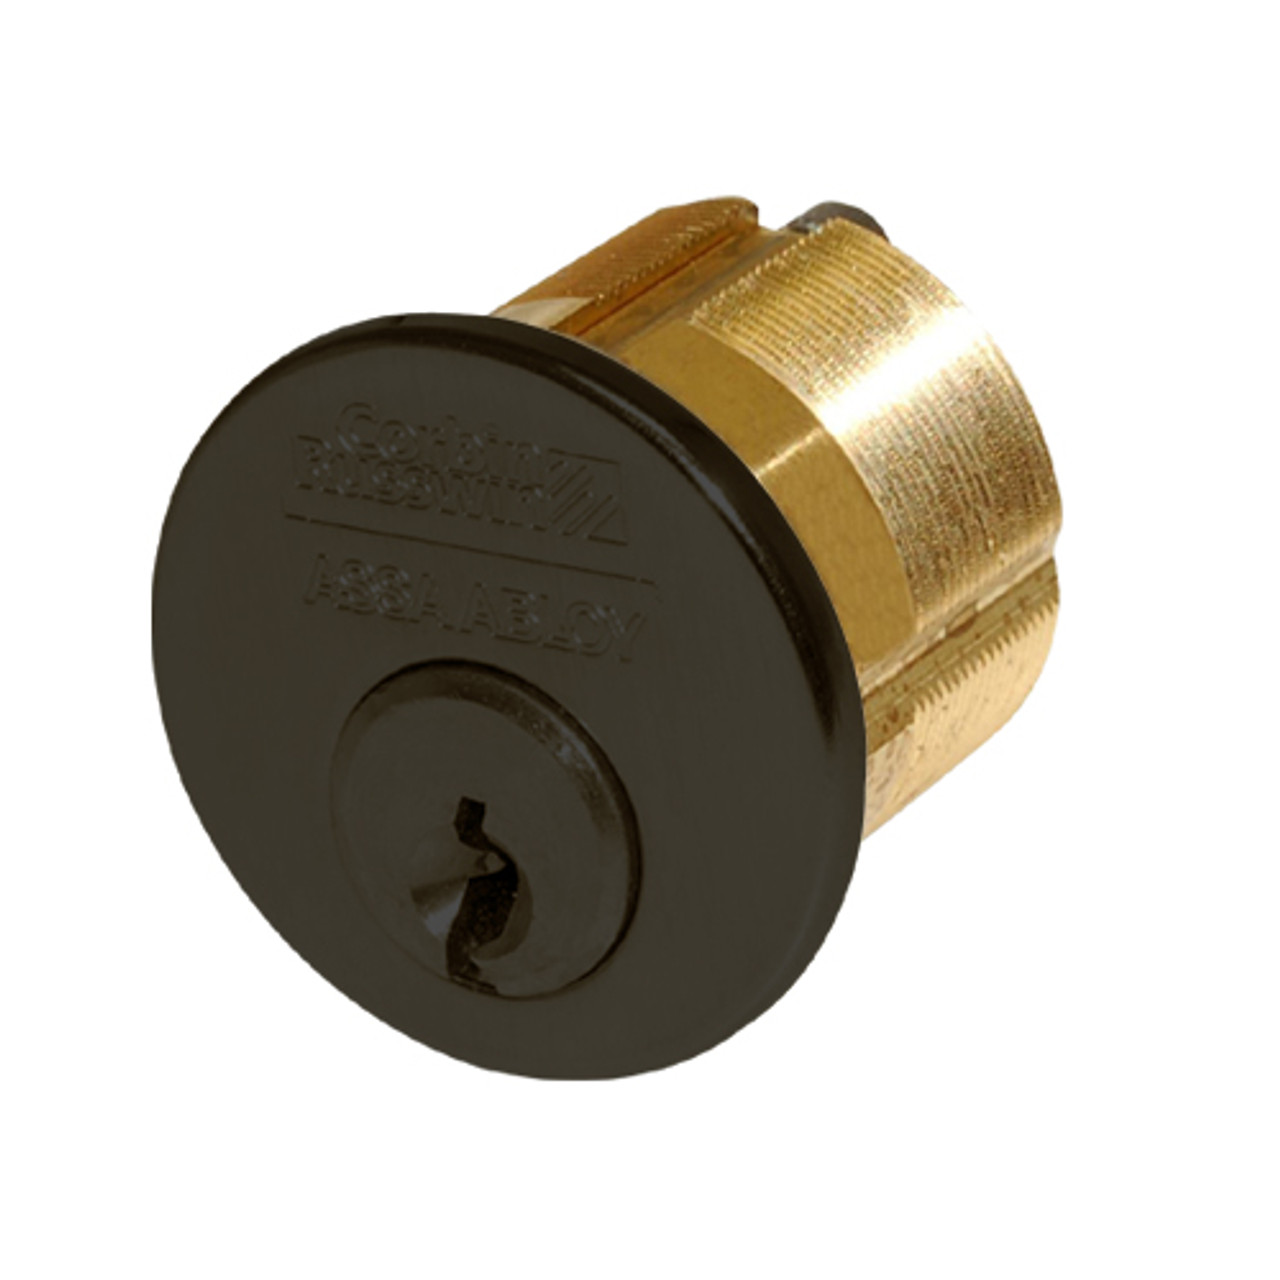 CR1000-114-A06-6-L4-613 Corbin Conventional Mortise Cylinder for Mortise Lock and DL3000 Deadlocks with Schlage L9000 Cam in Oil Rubbed Bronze Finish